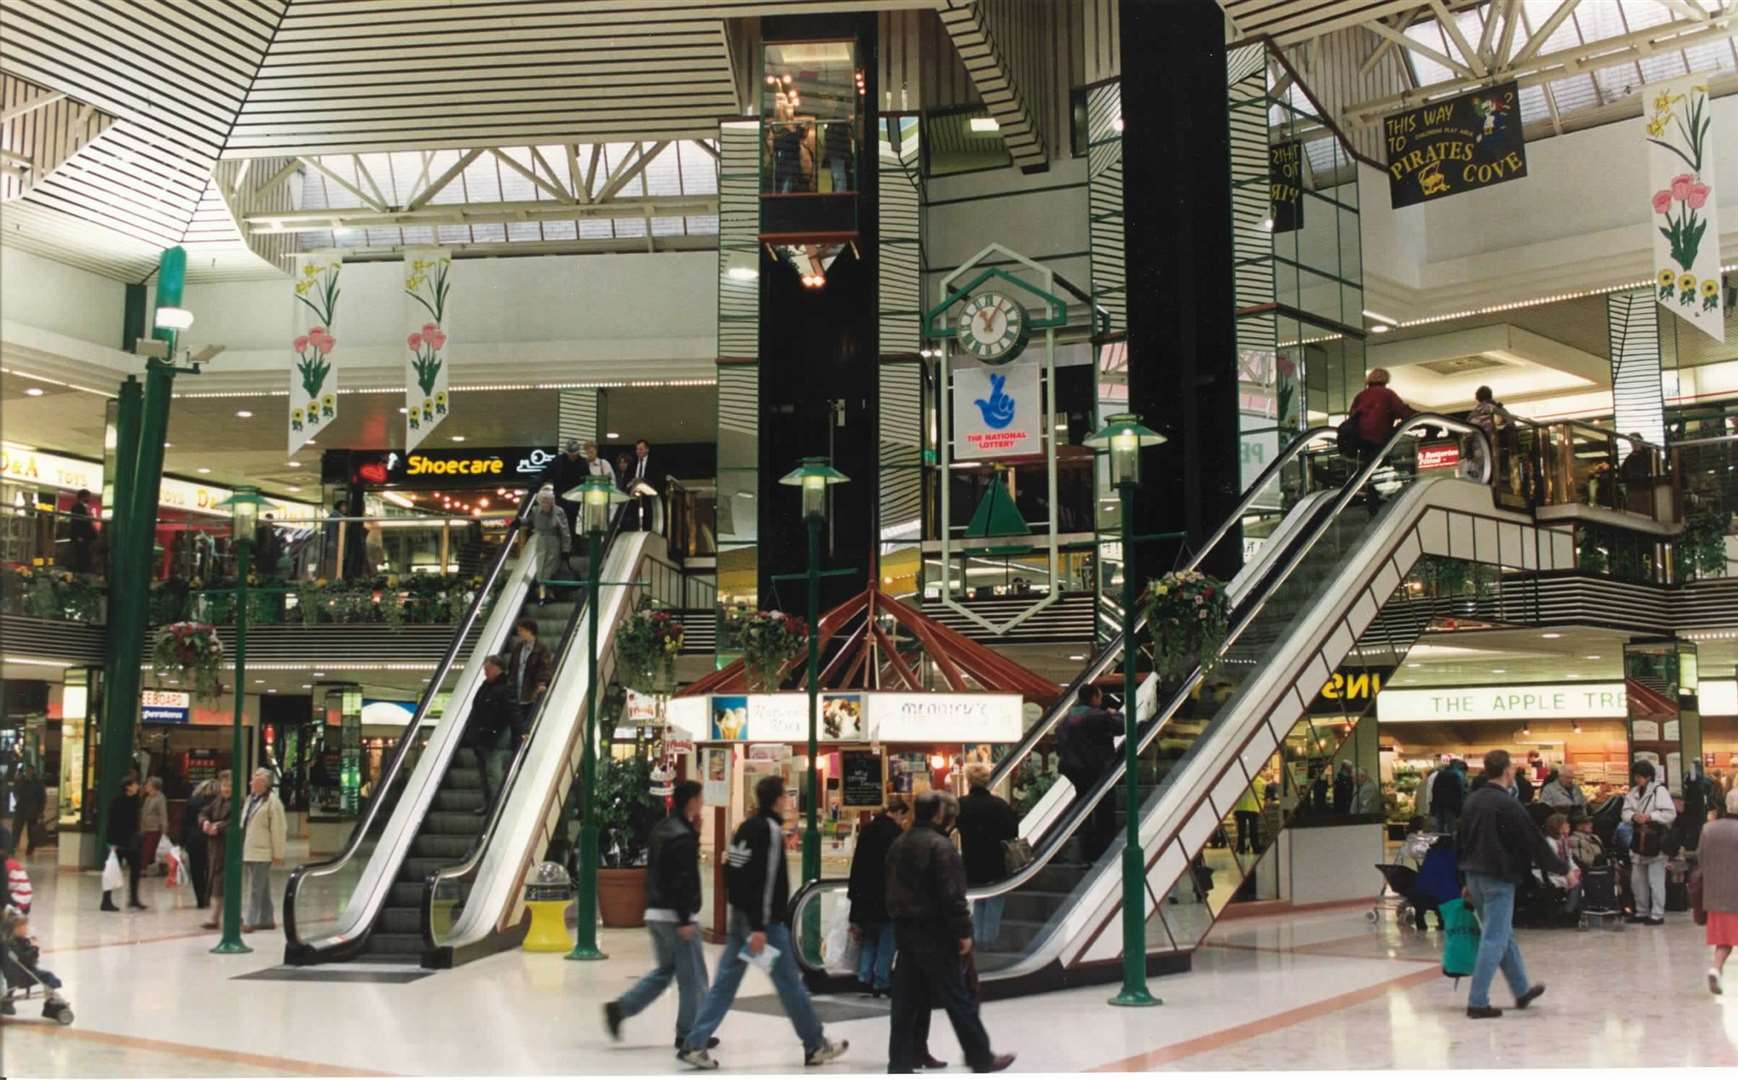 Inside the Pentagon shopping precinct in Chatham in 1996